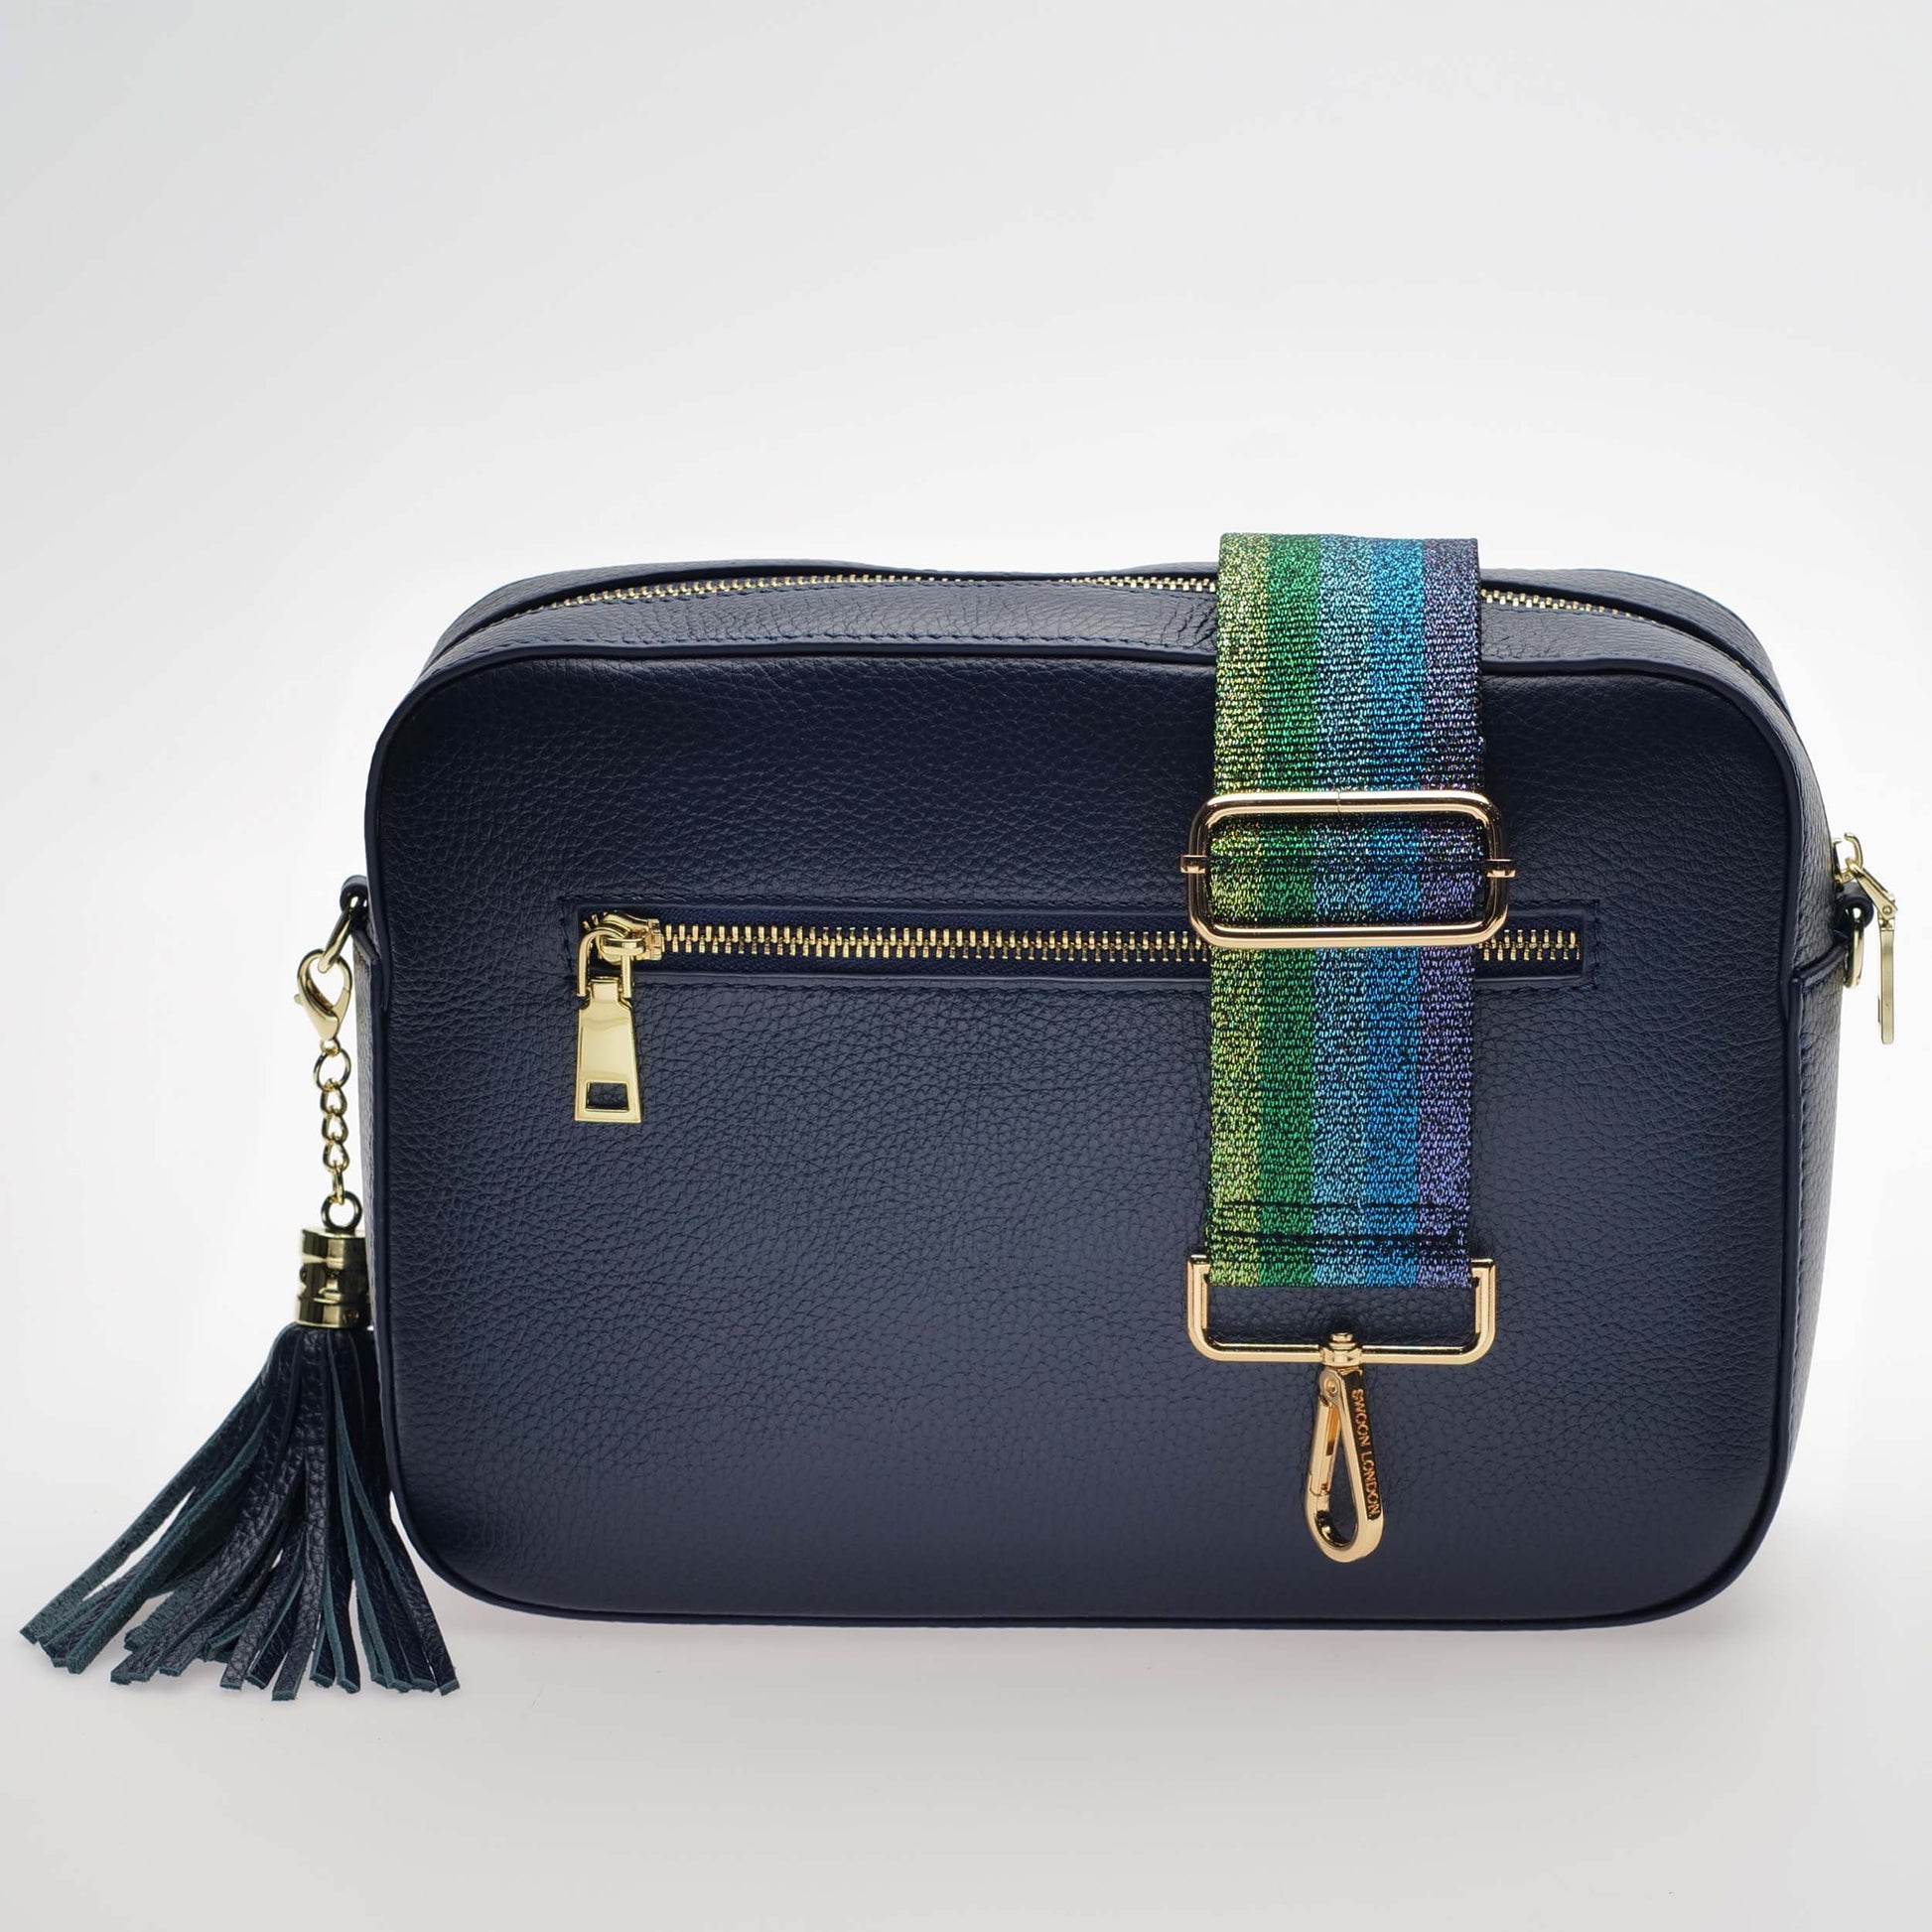 Blue Rainbow Strap by Swoon London